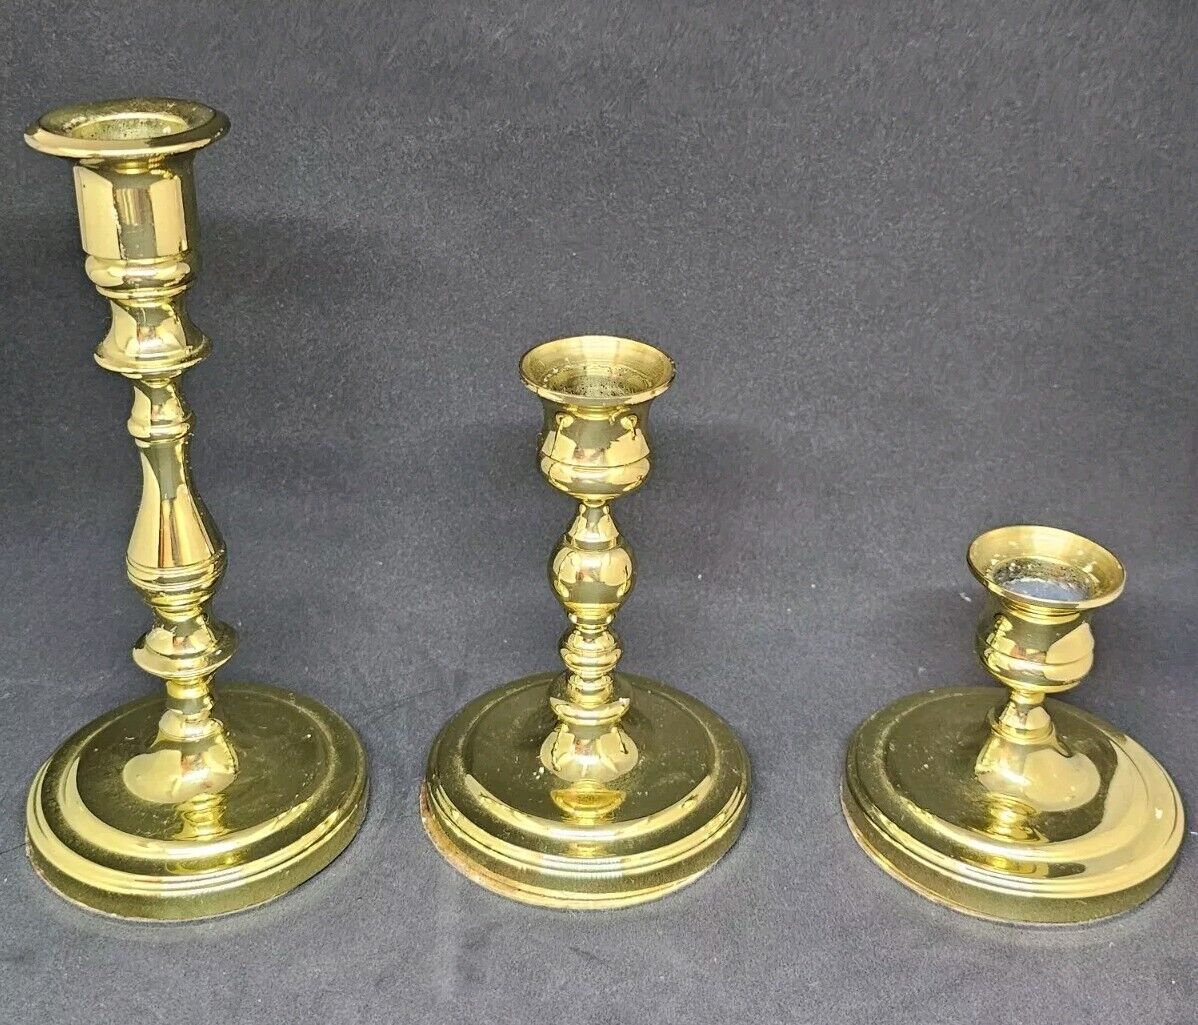 3 VINTAGE BRASS BALDWIN CANDLESTICKS CANDLE HOLDERS 7 Inch 5 Inch 3 Inch